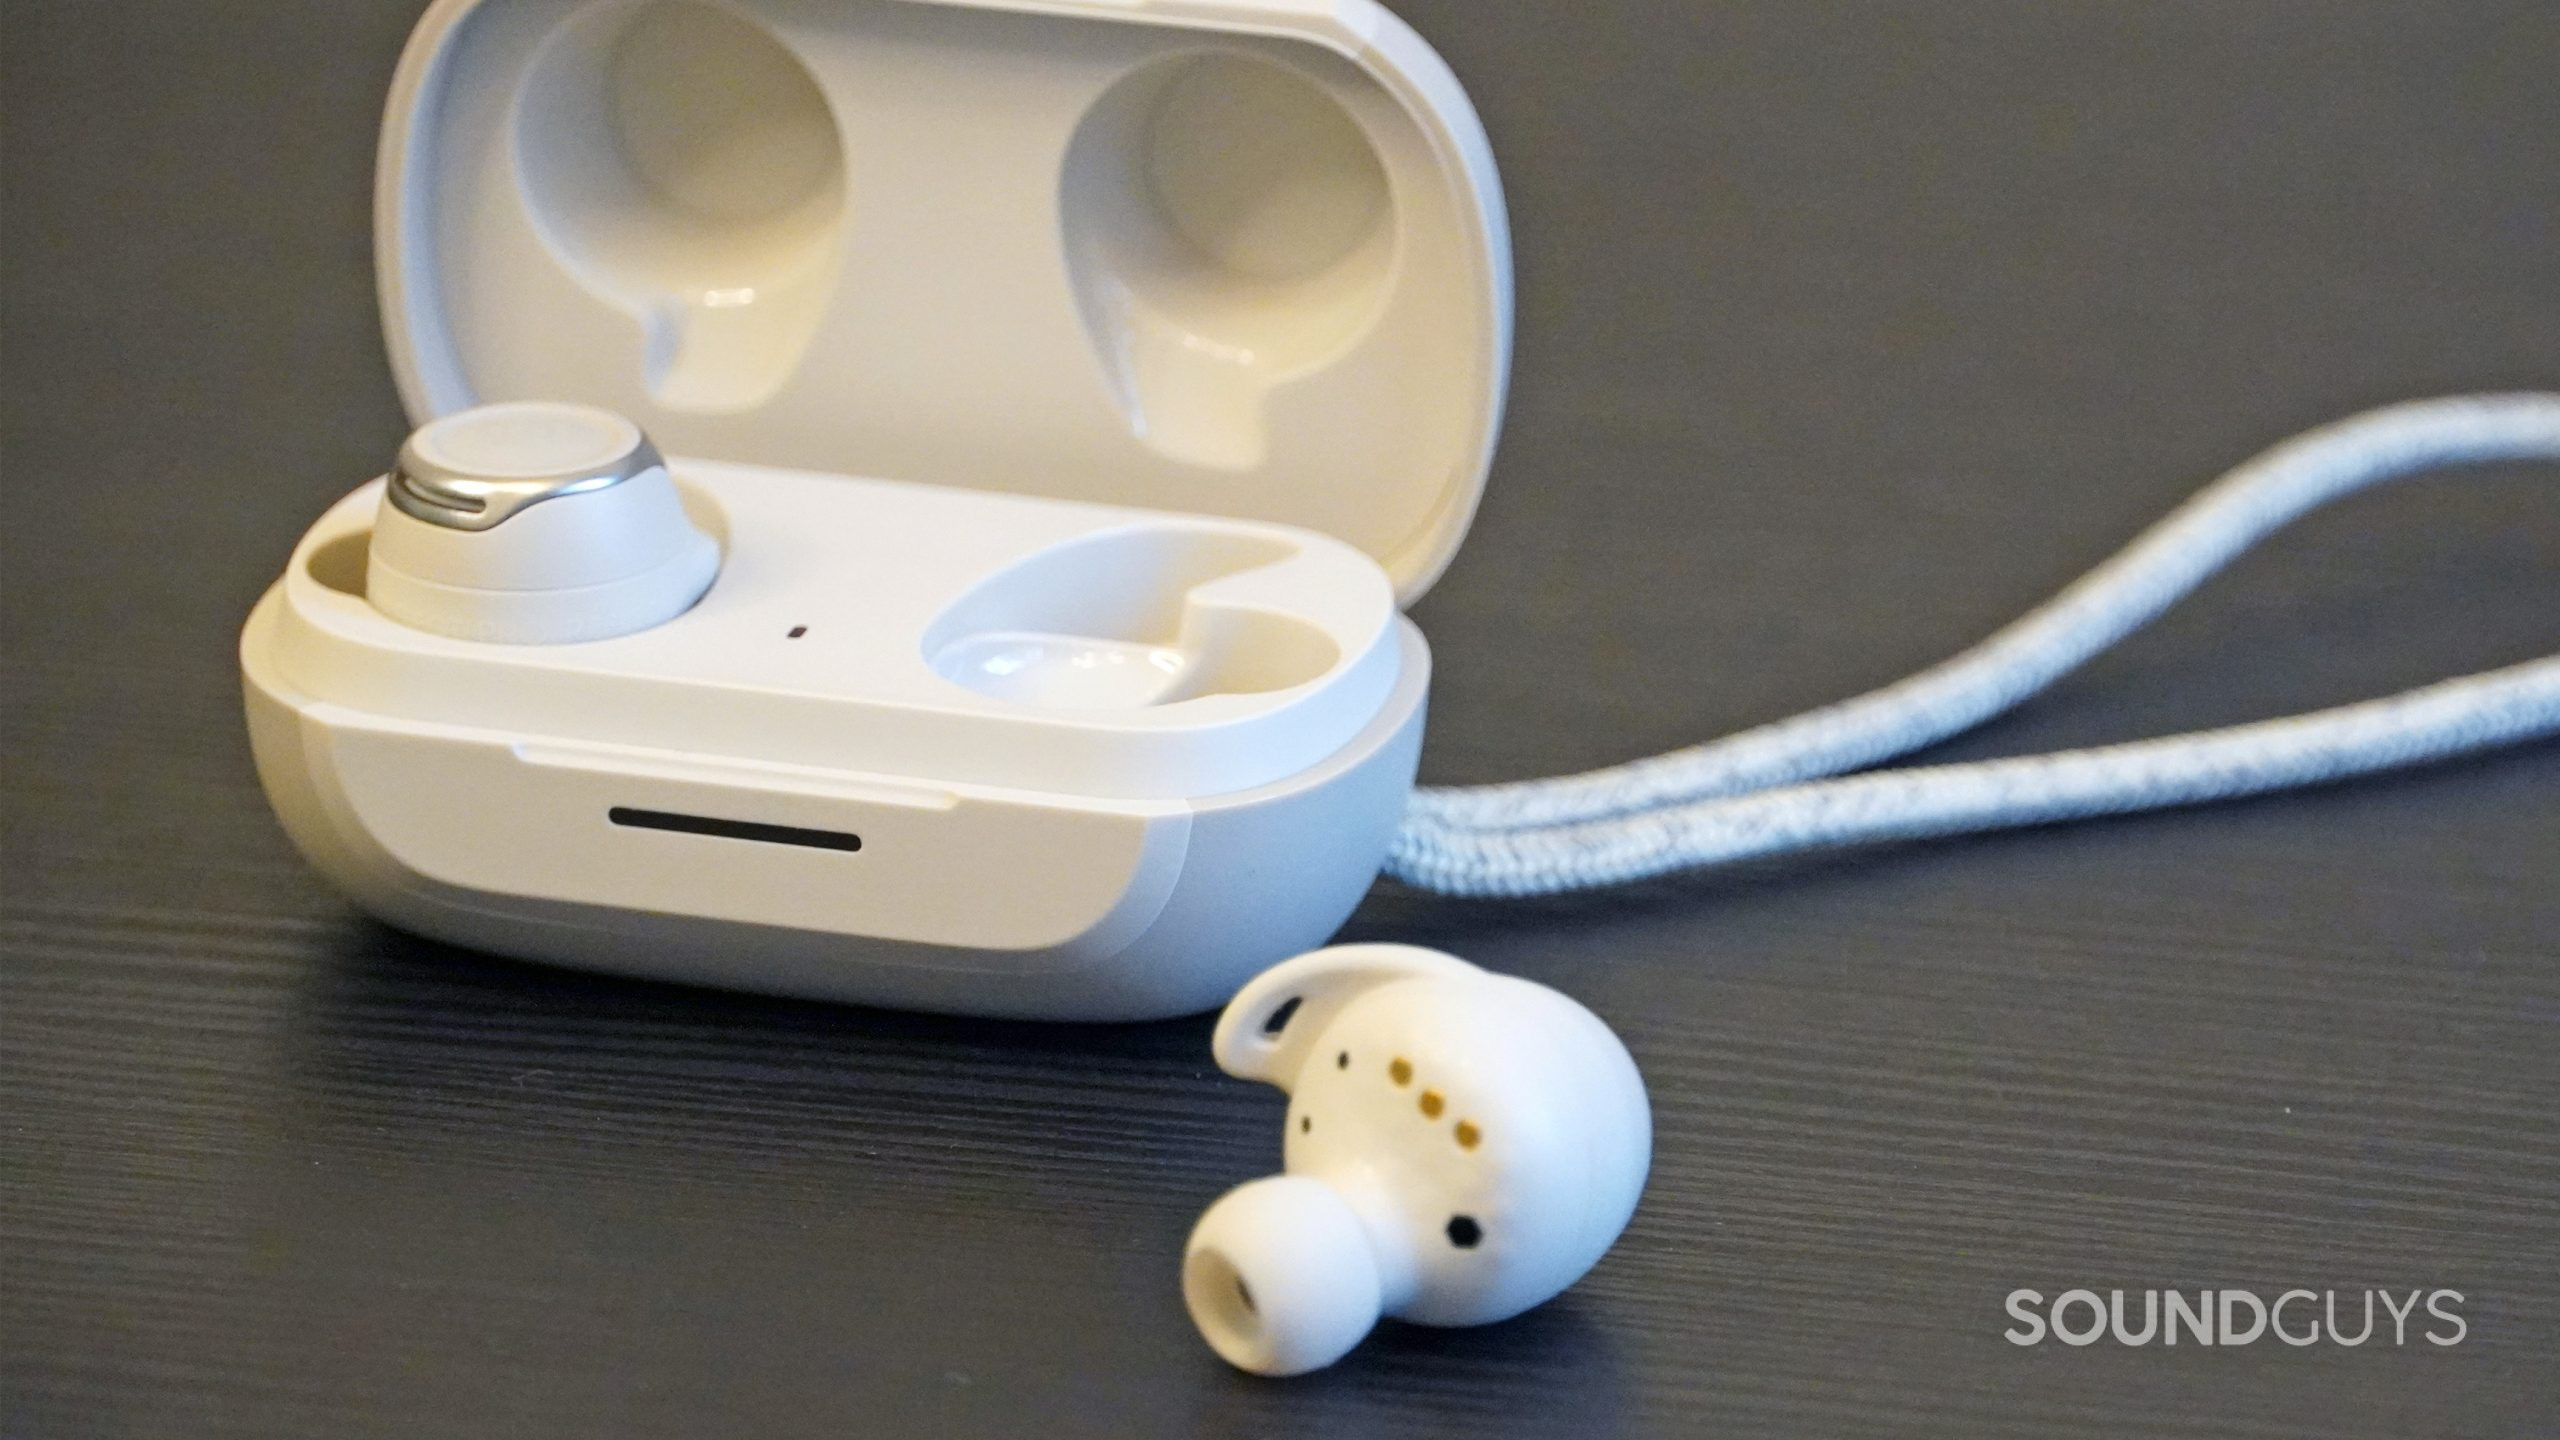 One JBL Reflect Flow Pro earbud outside of the case while the other is inside of the case behind it.